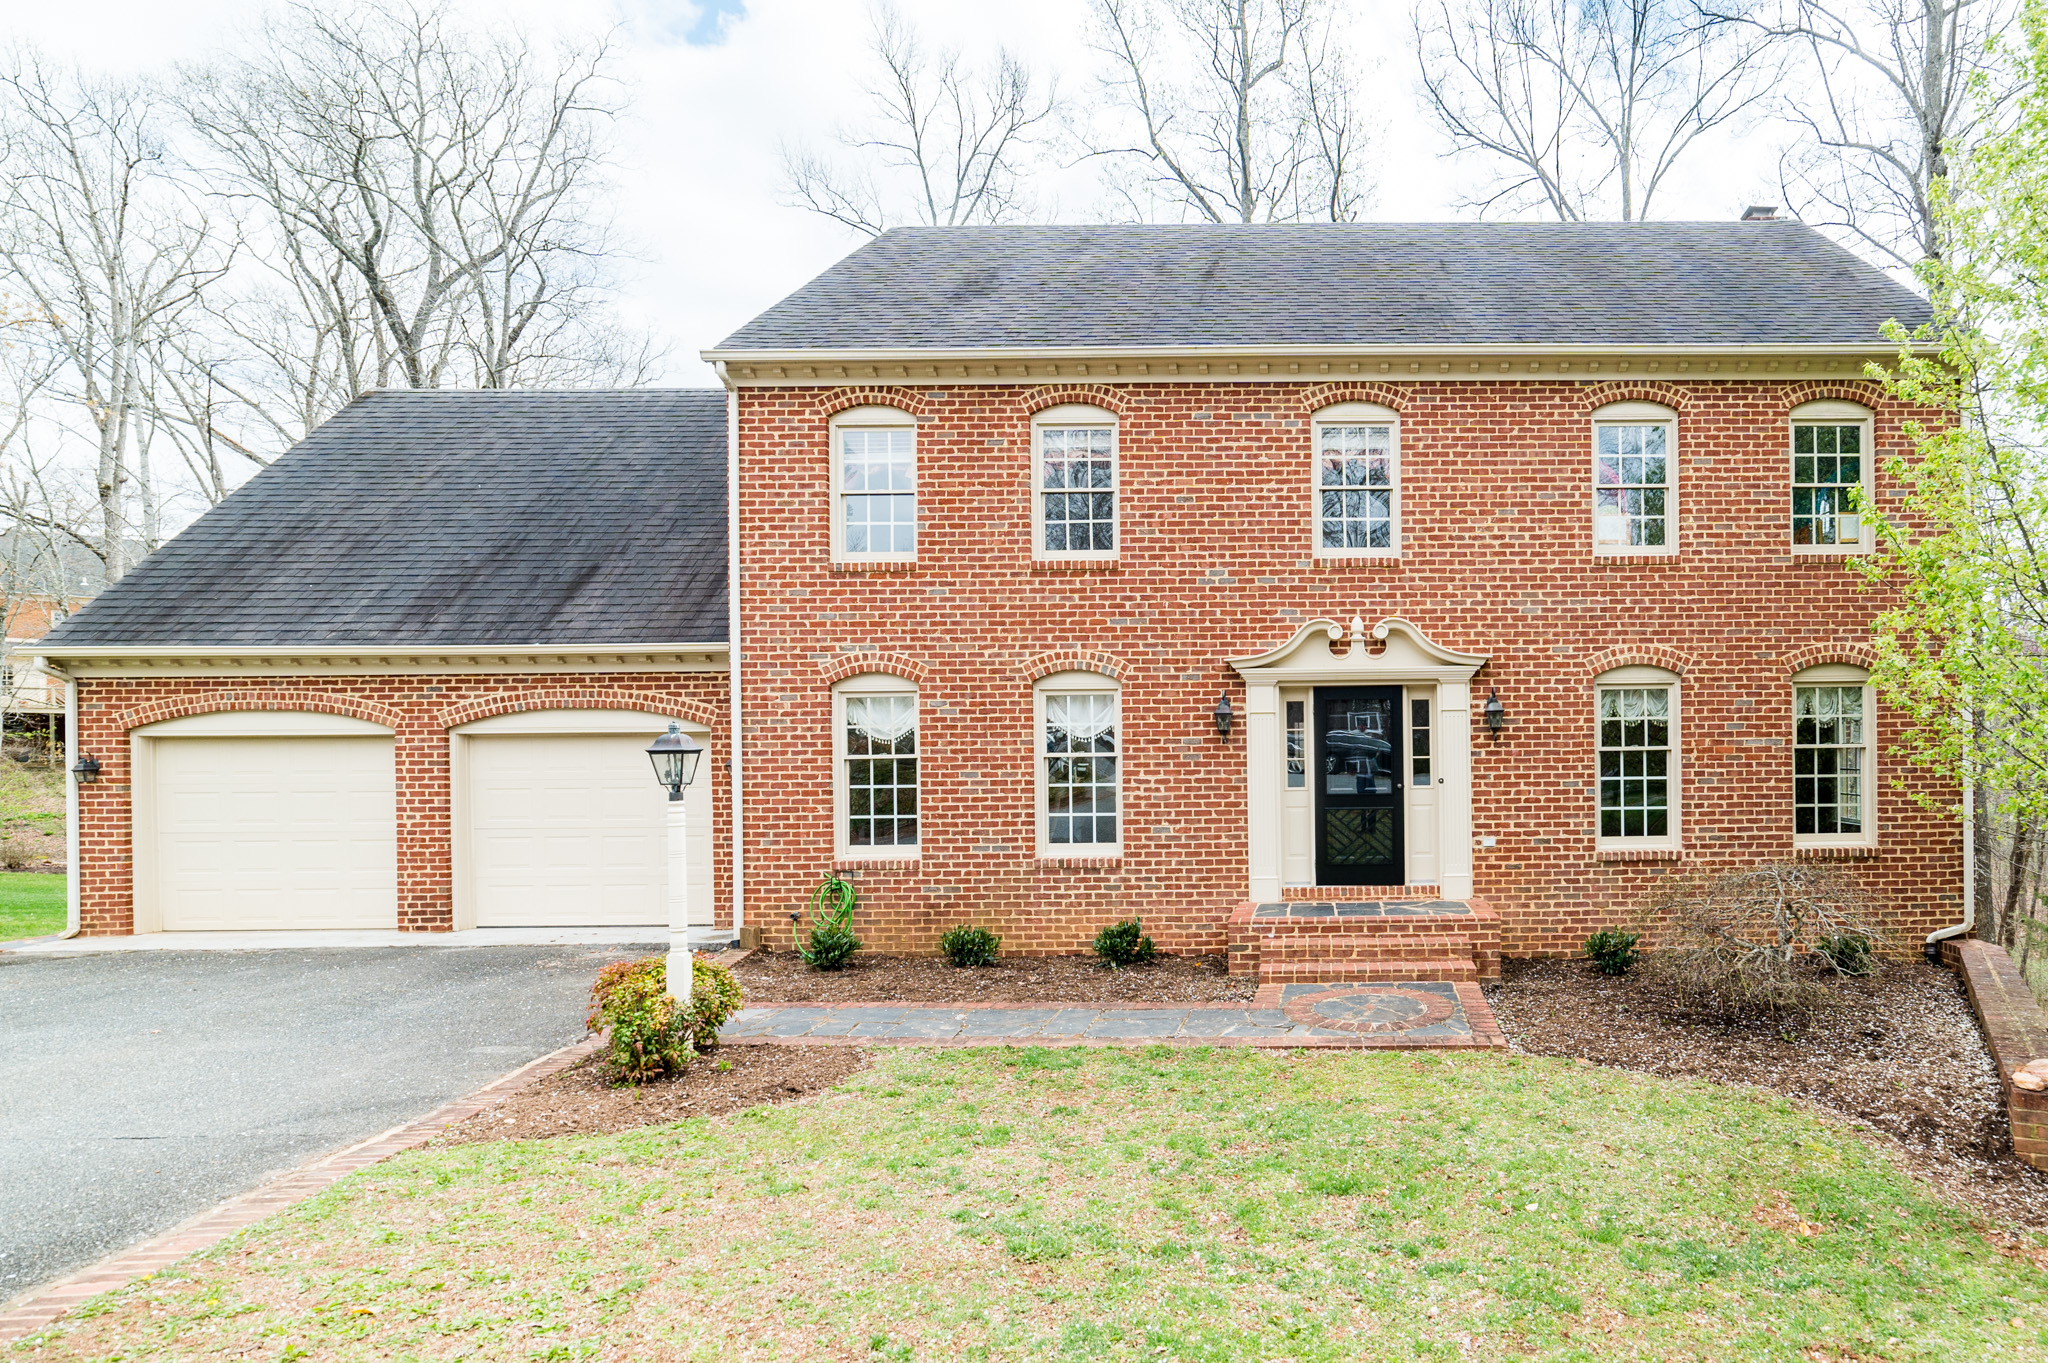 OPEN HOUSE – June 7th from 2 -4PM at 1216 Nichols Tavern Drive, Lynchburg